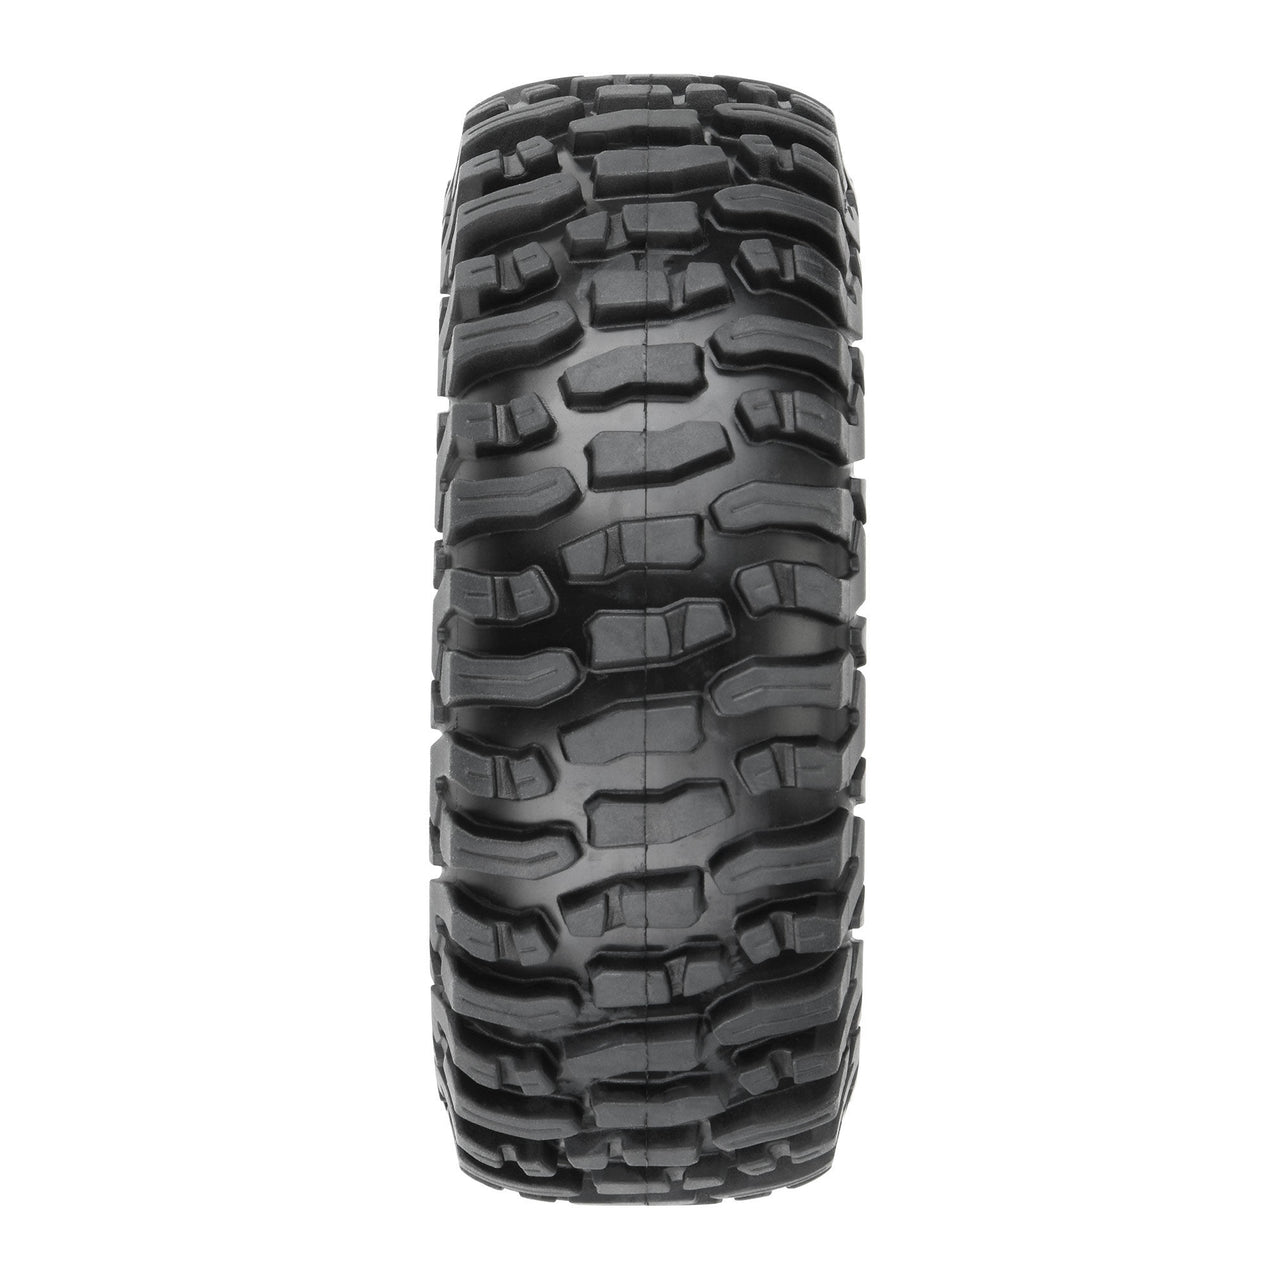 DTX4077 1/10 Fossil Front/Rear 1.9" Crawler Tires (2)